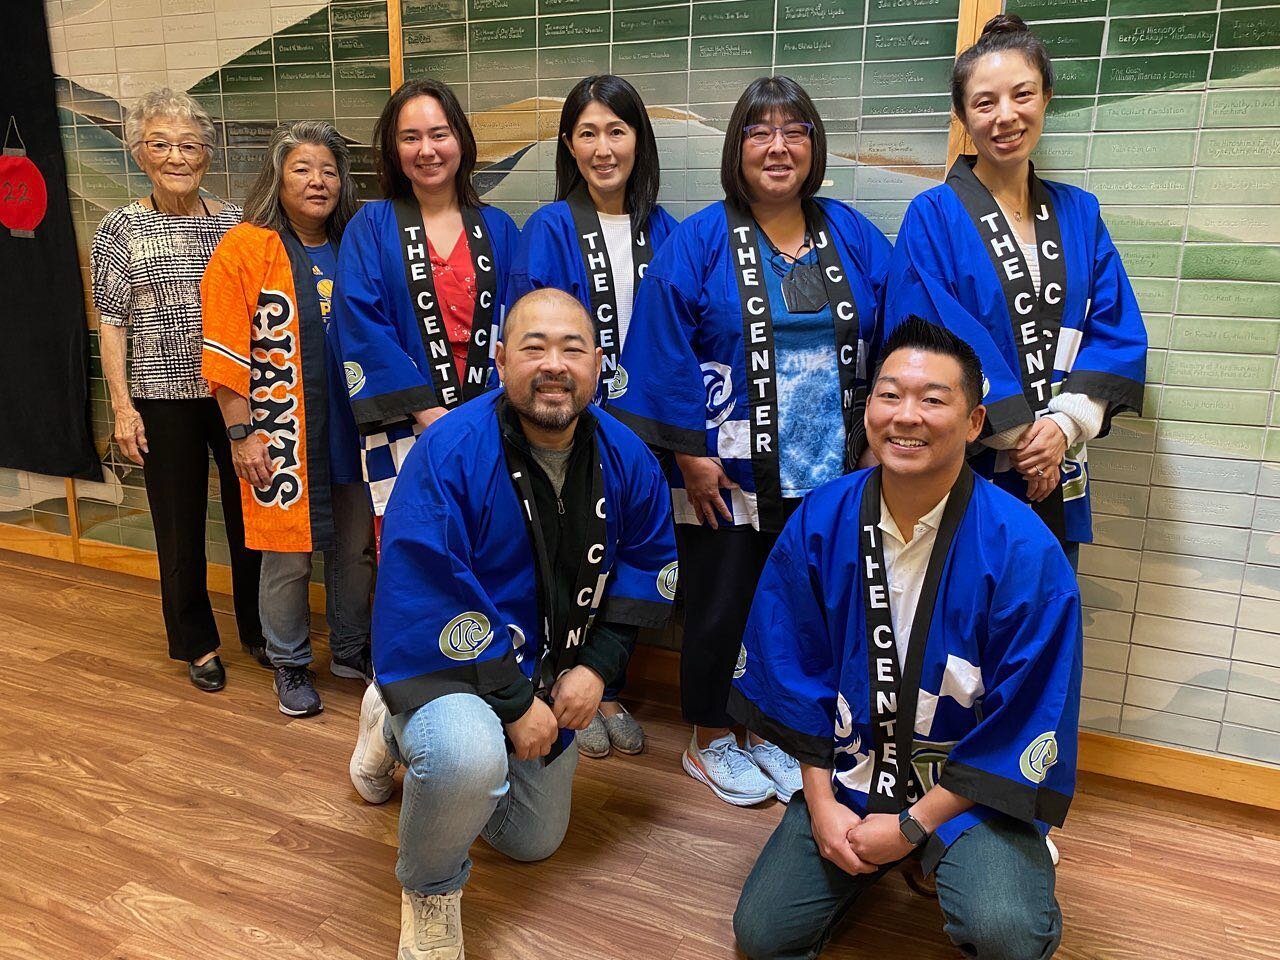 Yay! 🎉 SAKE DAY 2022 is &quot;Sold Out&quot; Again. (It always sells out ... always!) 🗣💯

So where does that ticket money go? Right to this great group of people @jcccnc_sf (The Japanese Cultural and Community Center of Northern California in Japa